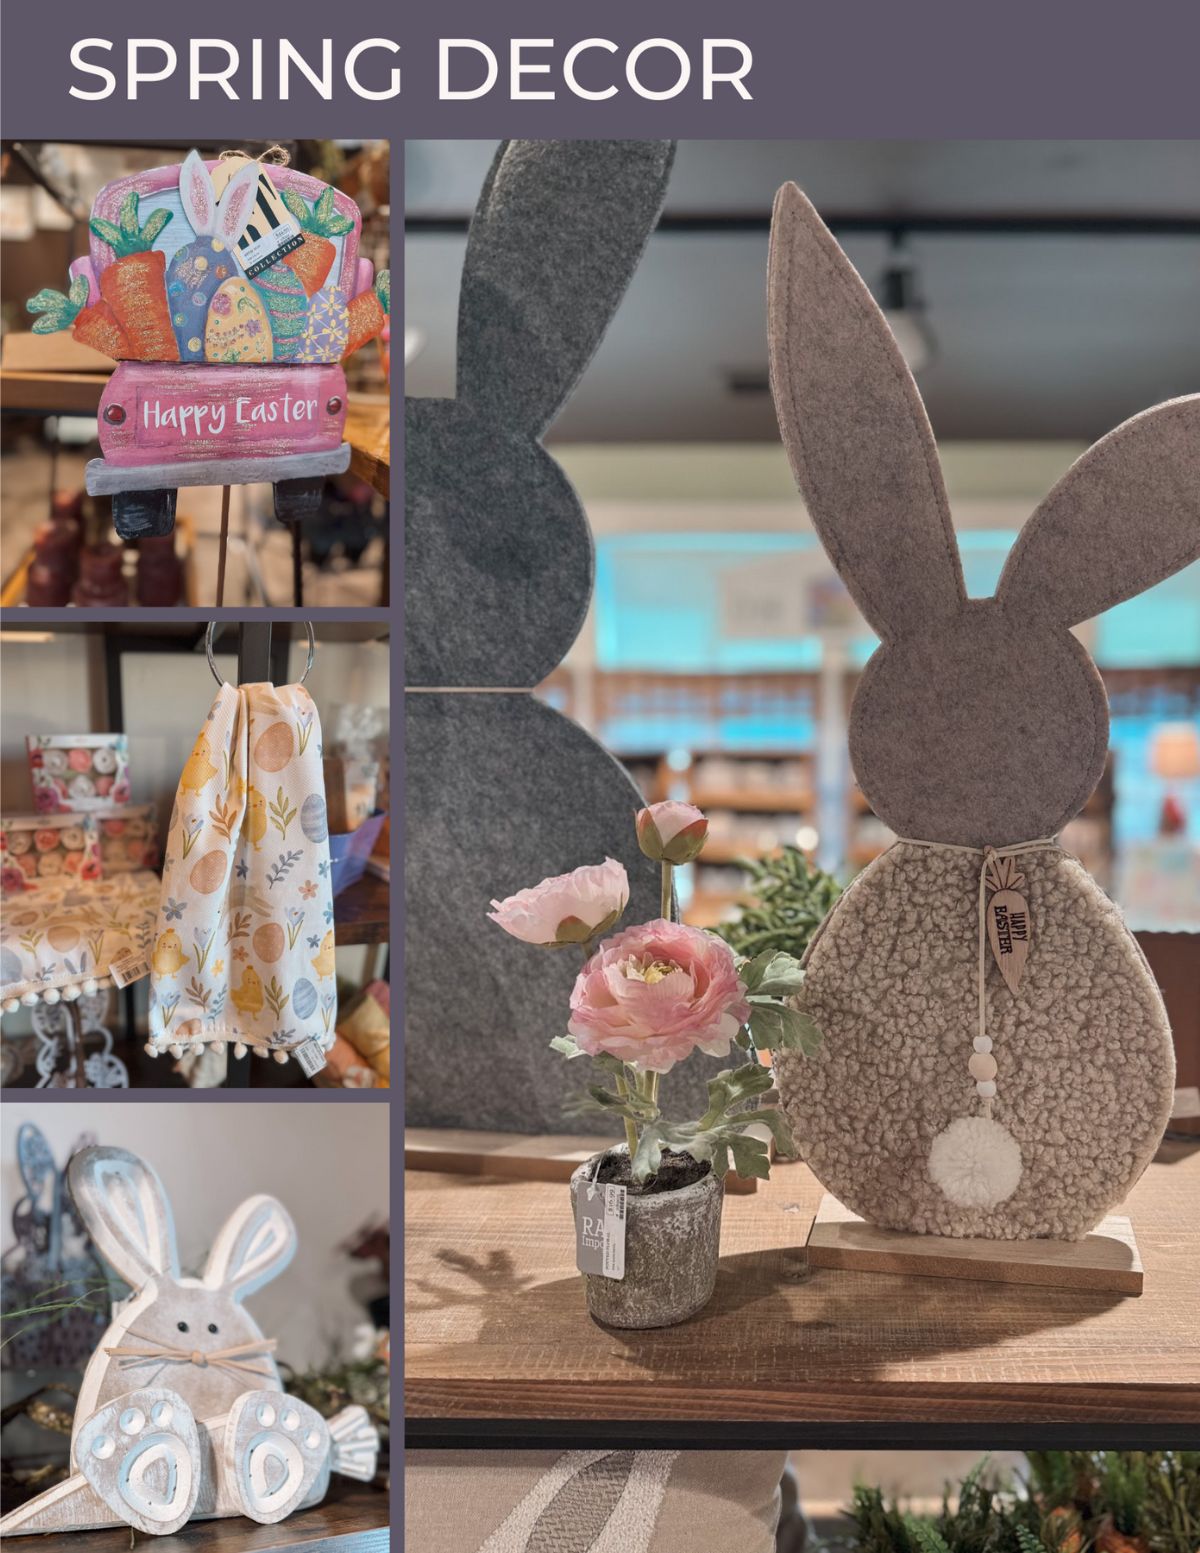 Lots of bunnies and spring decor